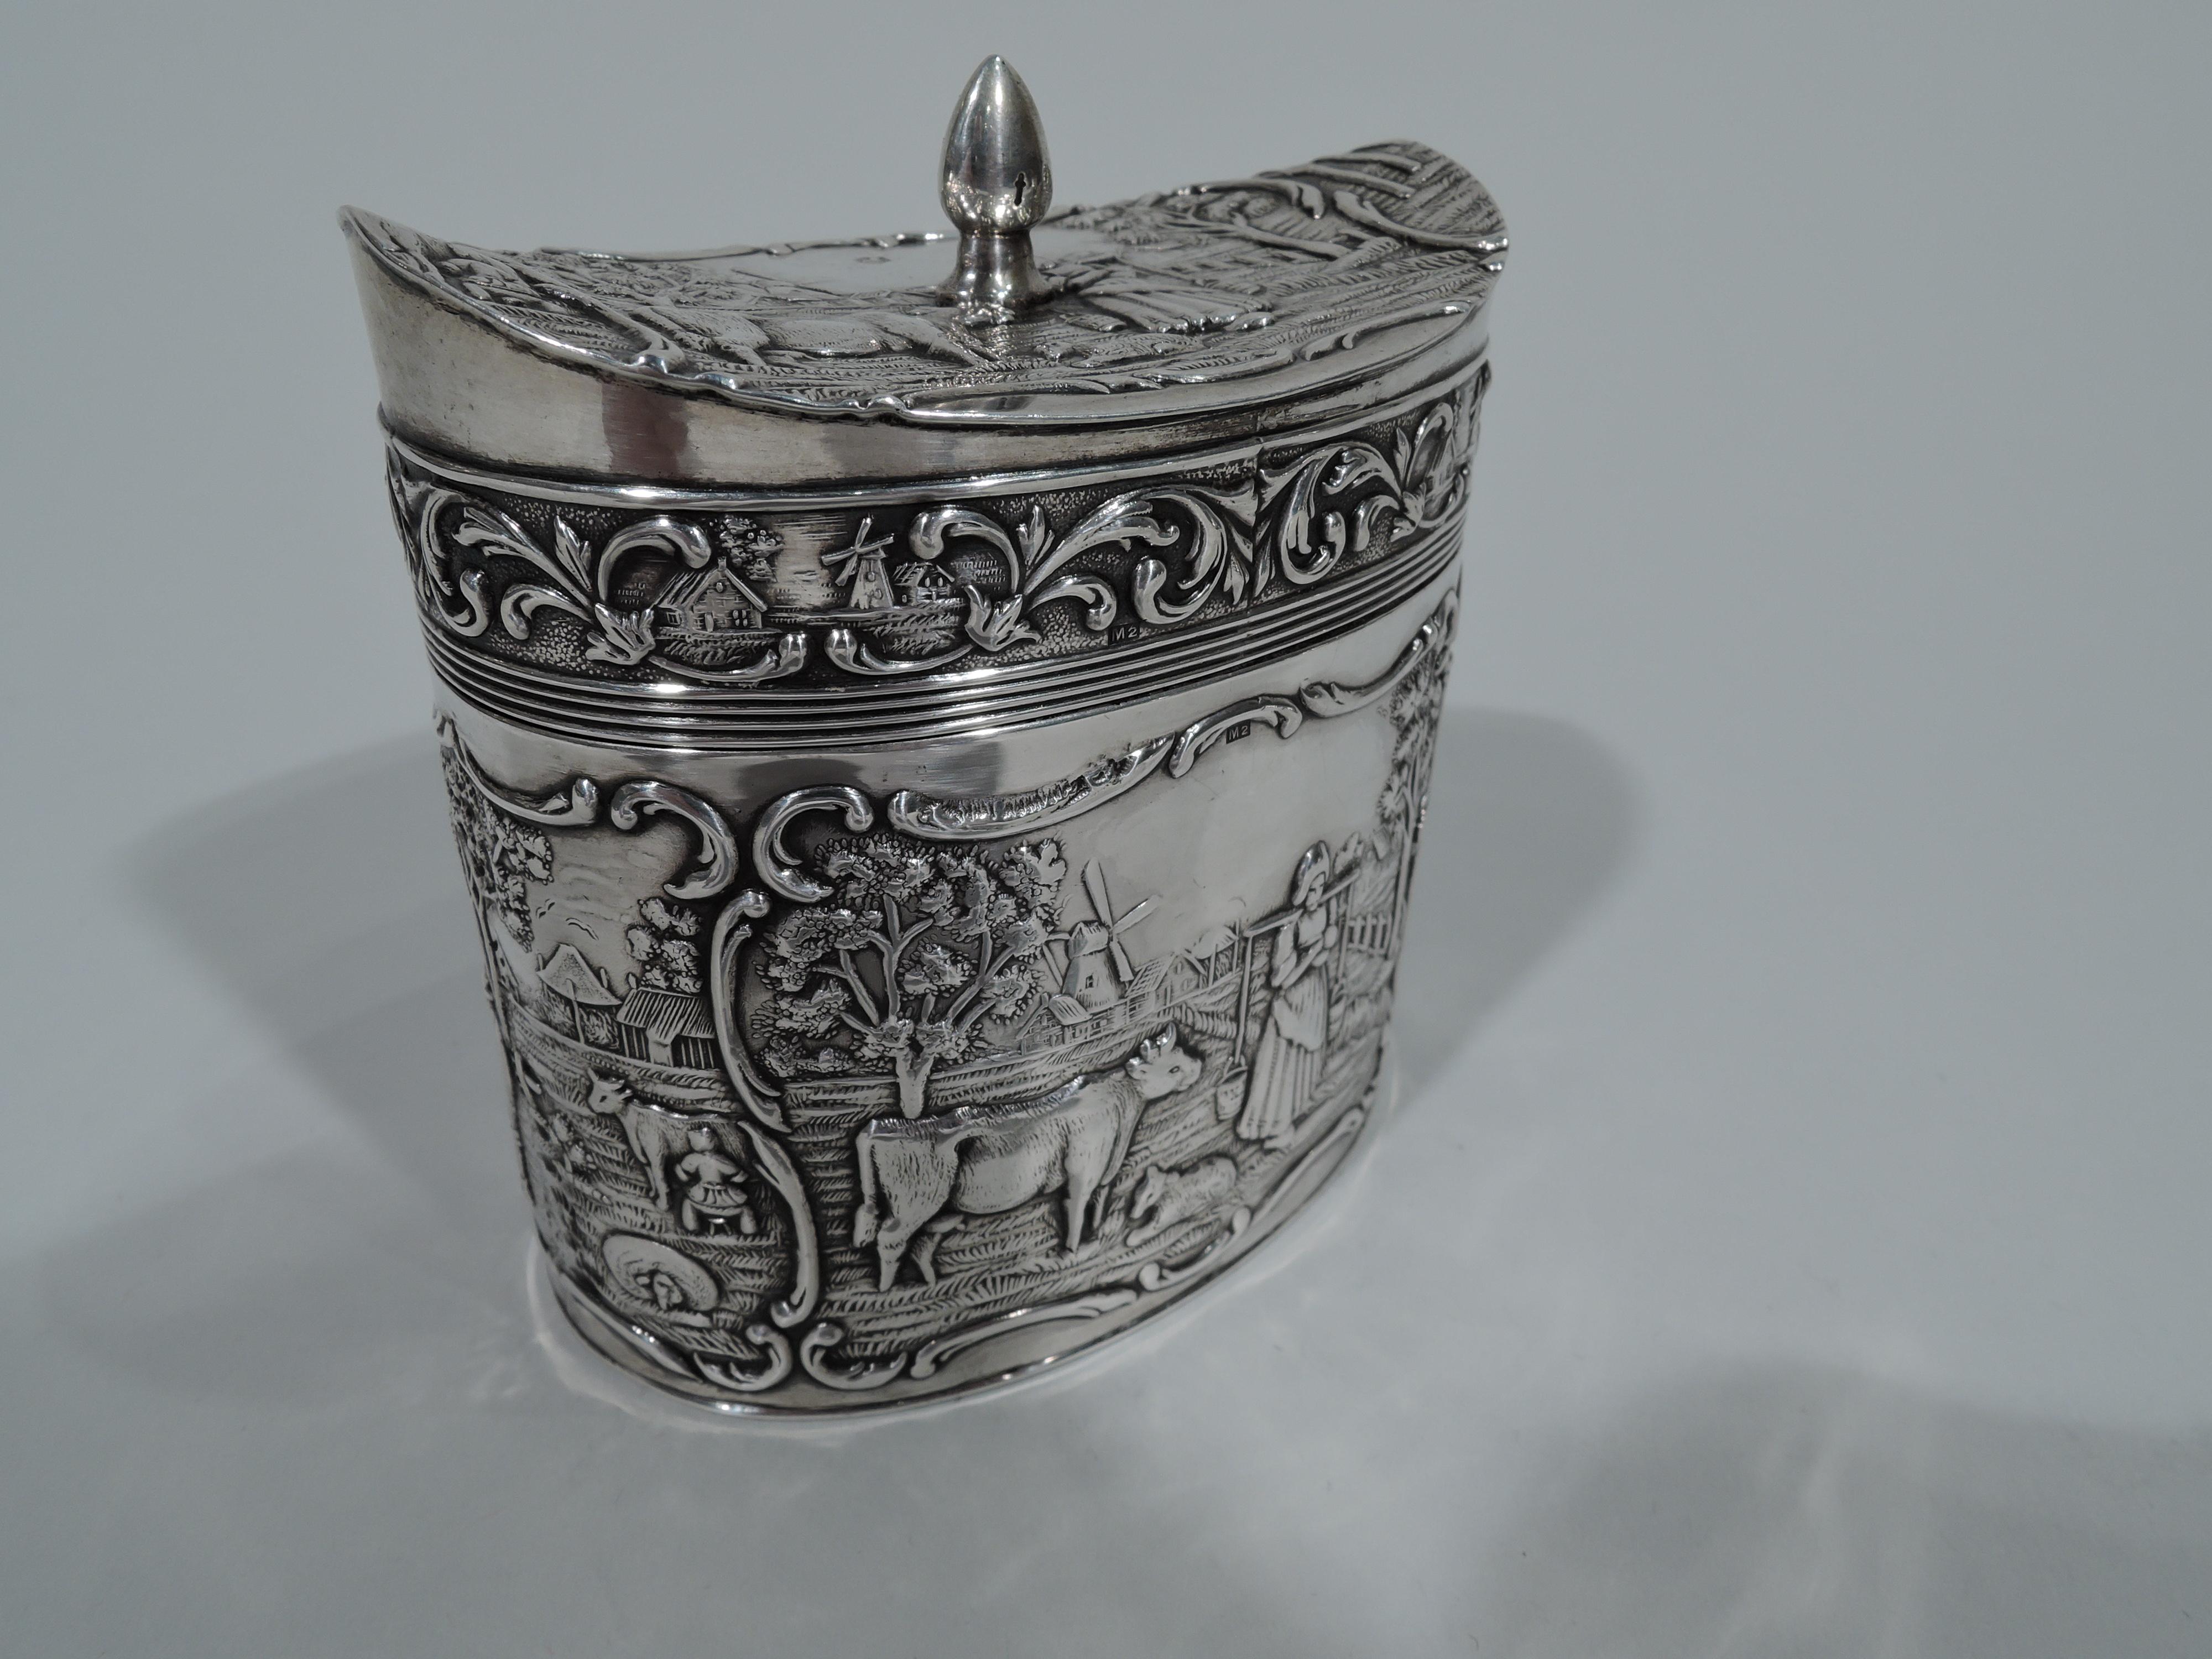 Sweet pastoral 833 silver tea caddy. Made by H. Hooykaas-Schoonhoven Silber Fabrik in Netherlands in 1927. Oval with hinged and concave cover. Chased and engraved scenes of country life in scrolled frames: Milkmaids and cows against a background of